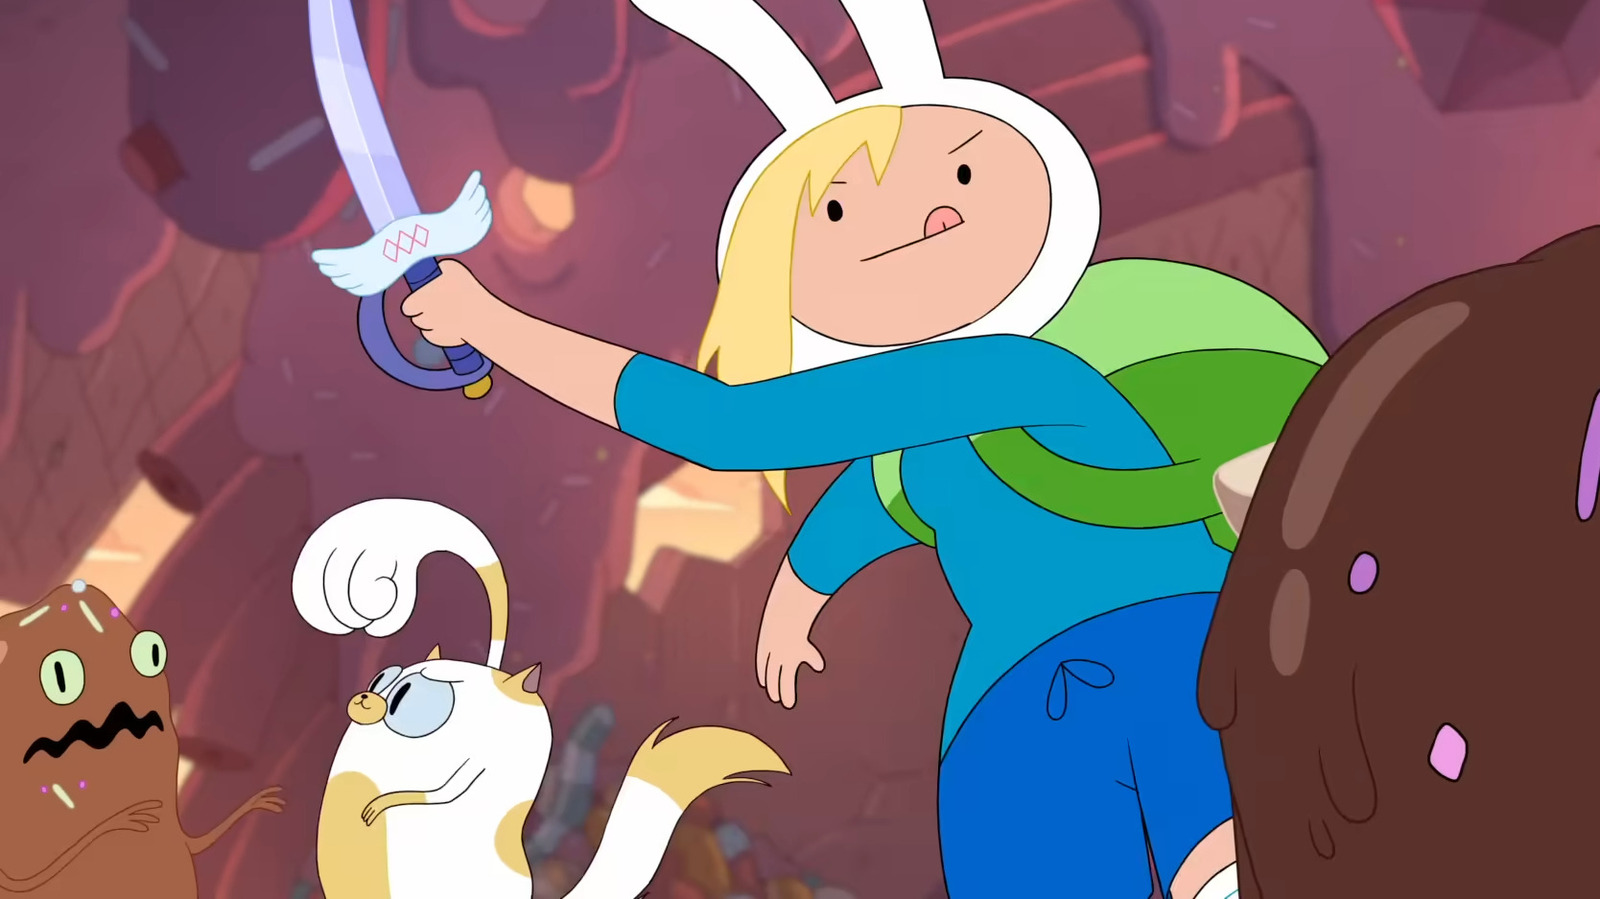 Adventure Time Fionna And Cake Release Date, Cast, Trailer, Plot And